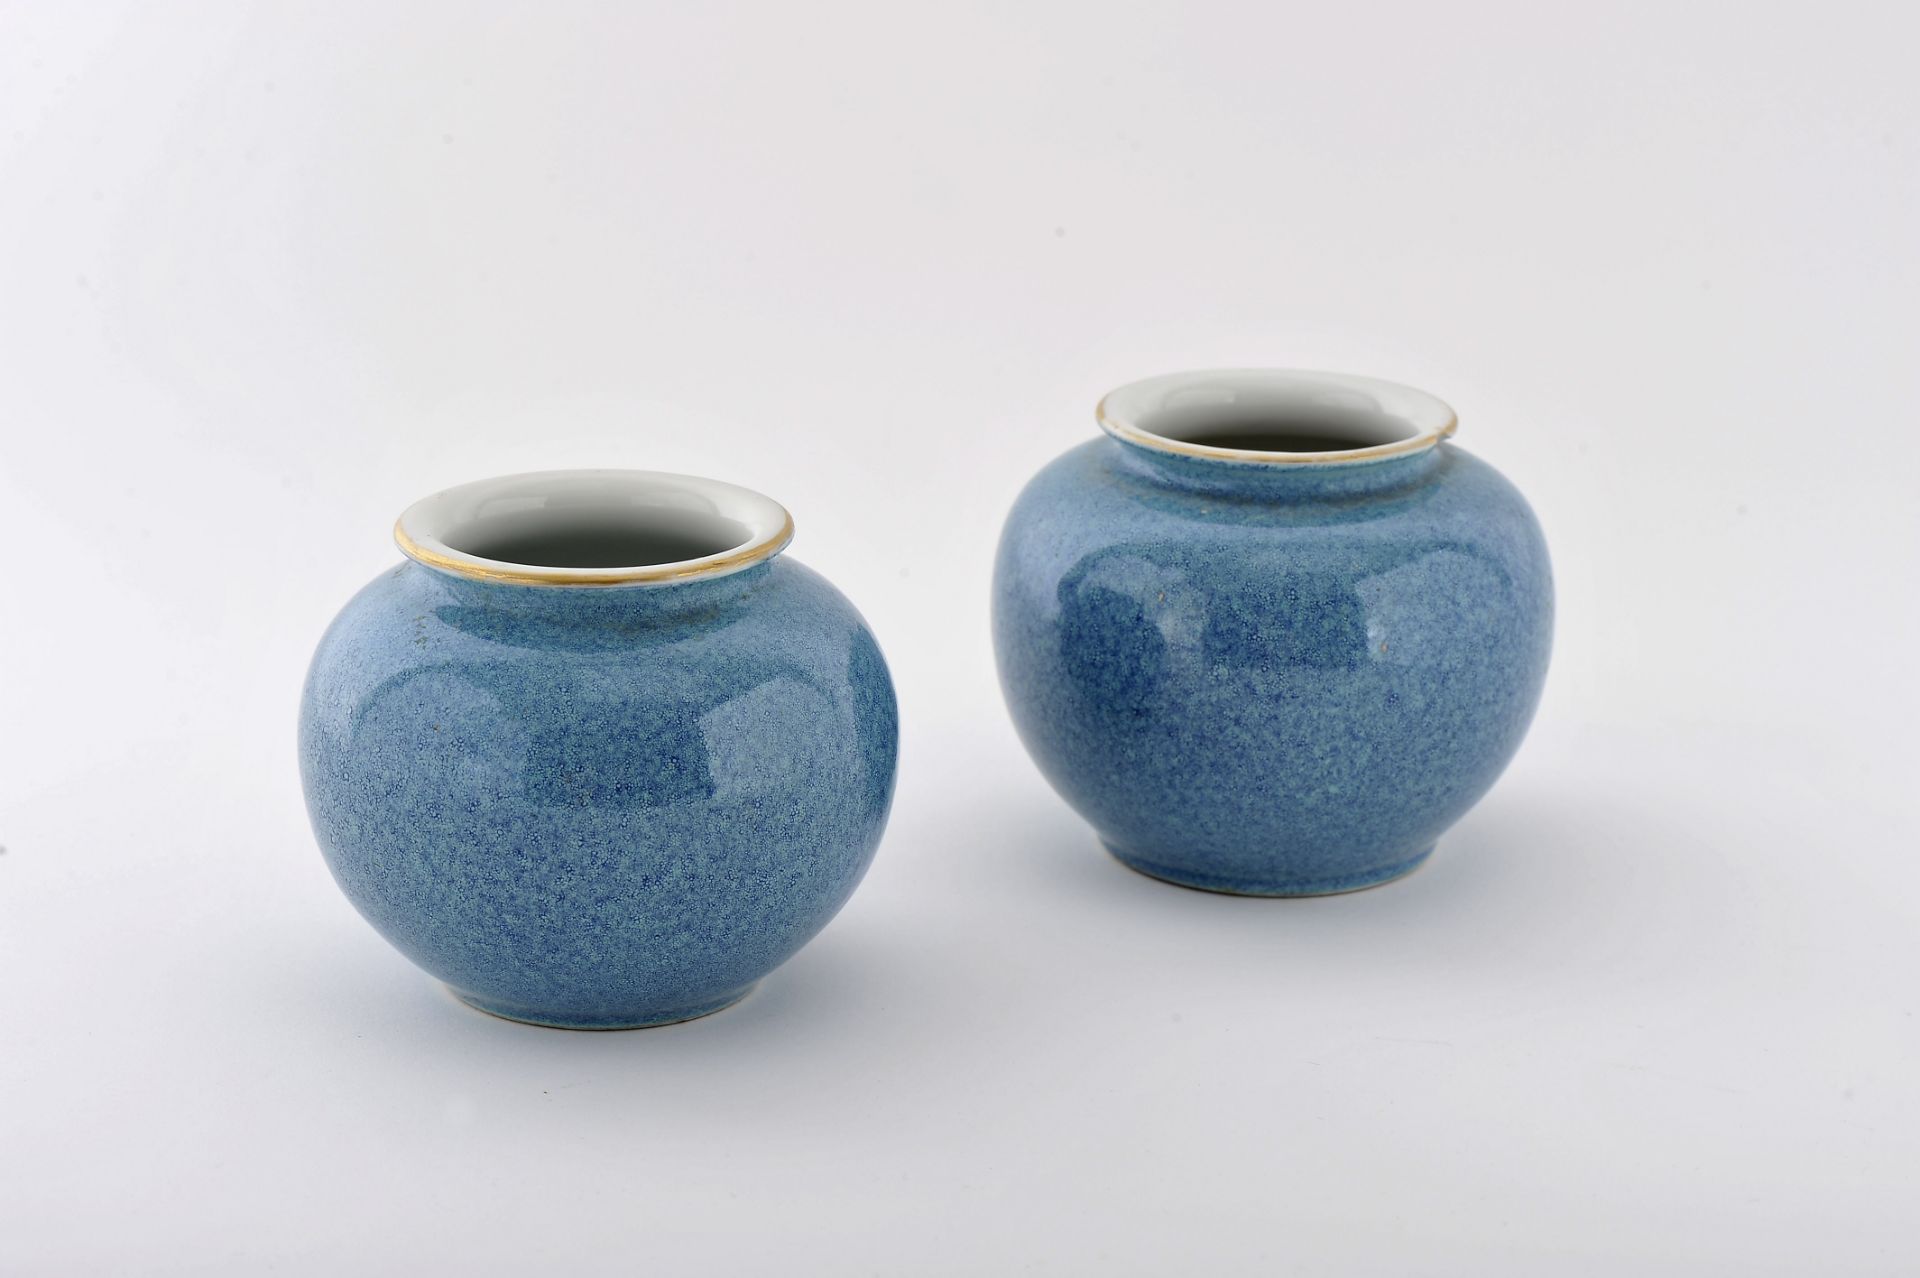 A pair of potbellied vases